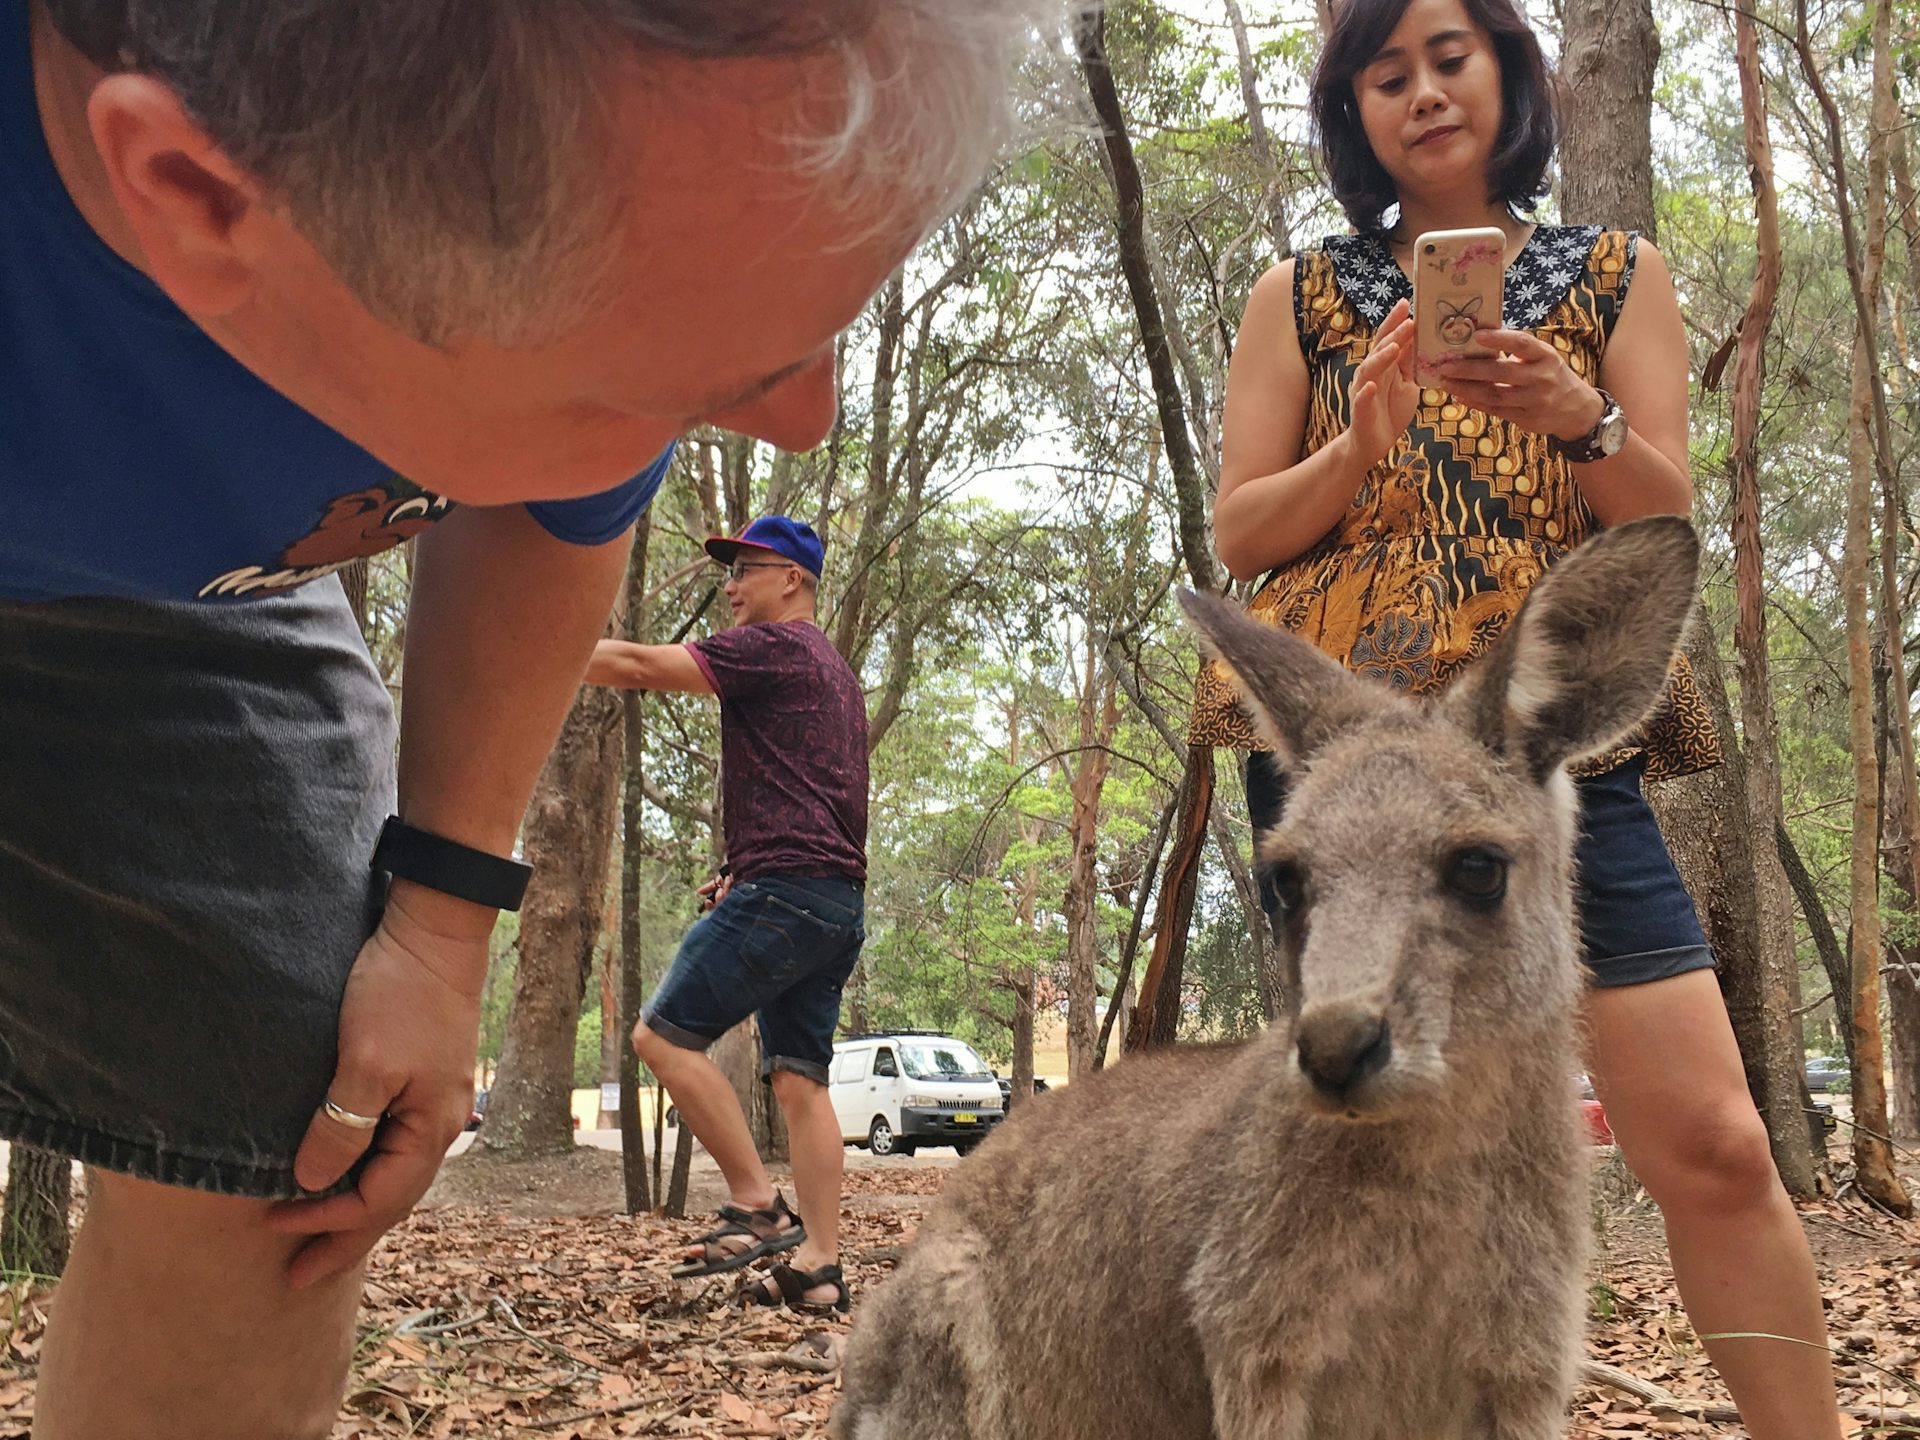 Is That Selfie Really Worth it? Why Face Time With Wild Animals is a Bad Idea